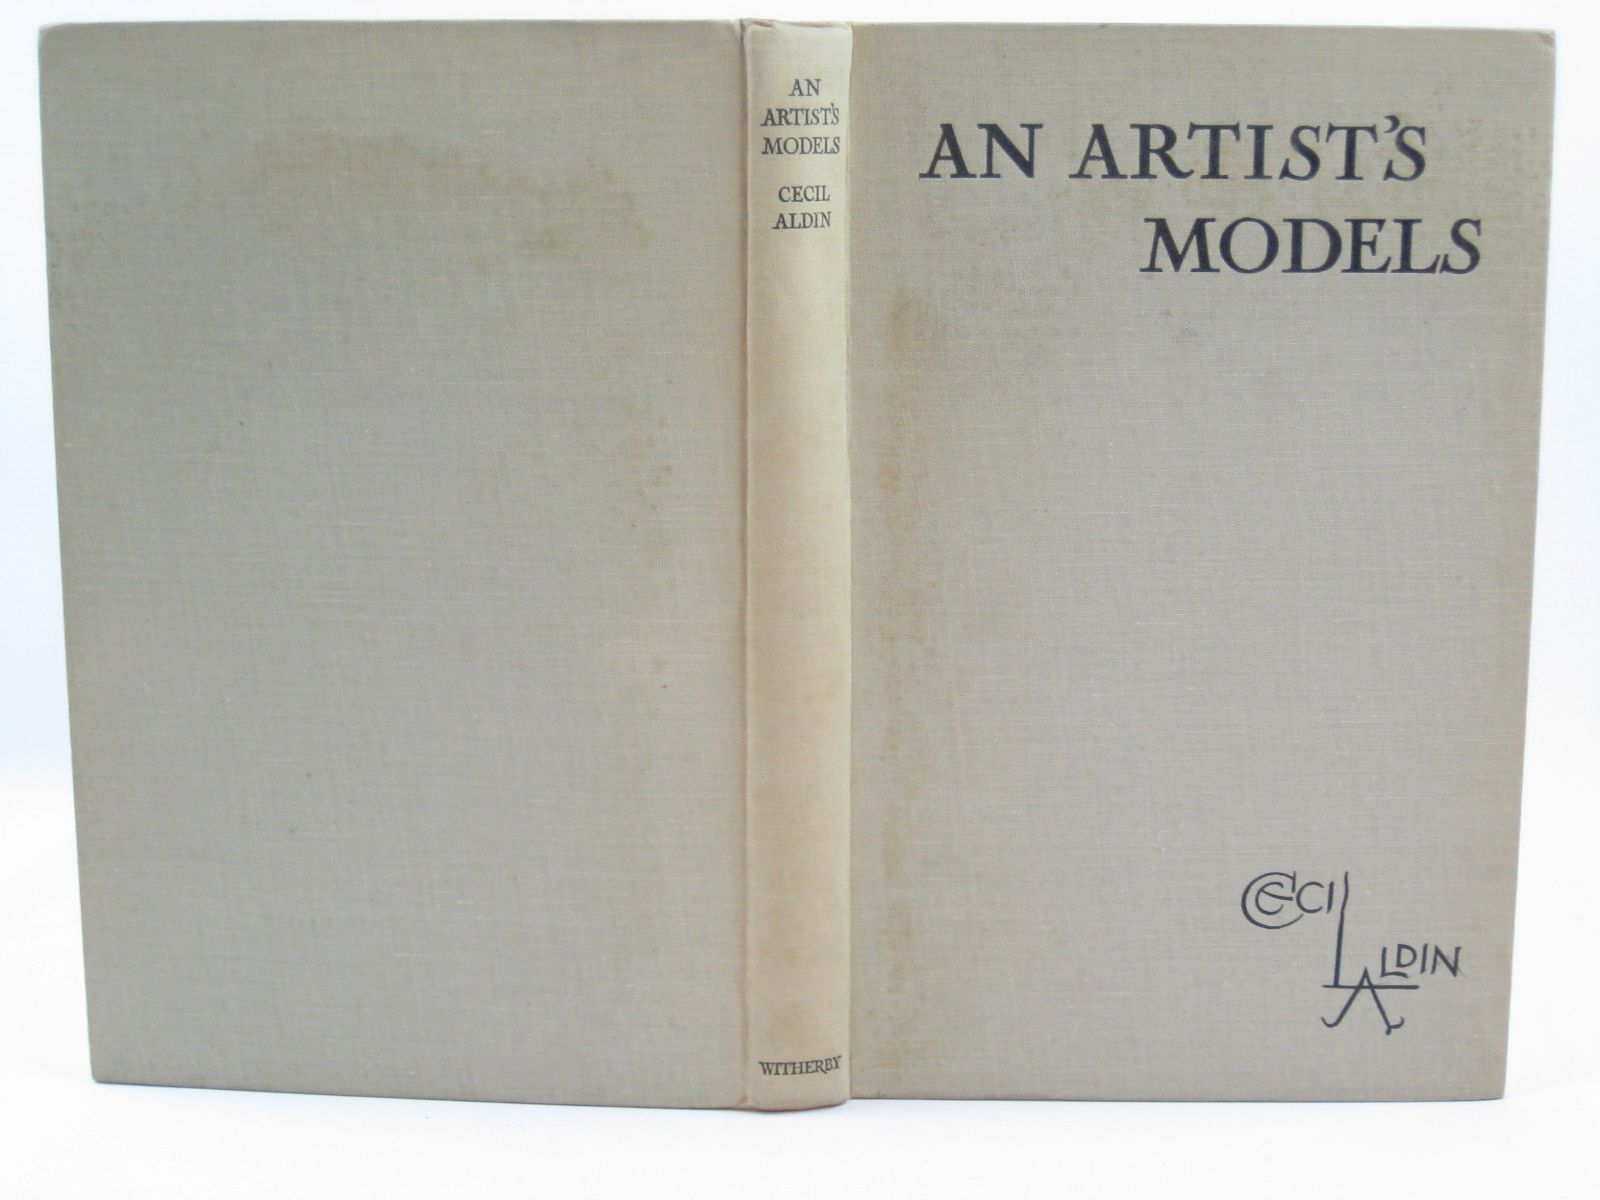 Photo of AN ARTIST'S MODELS written by Aldin, Cecil illustrated by Aldin, Cecil published by H. F. & G. Witherby (STOCK CODE: 1406360)  for sale by Stella & Rose's Books